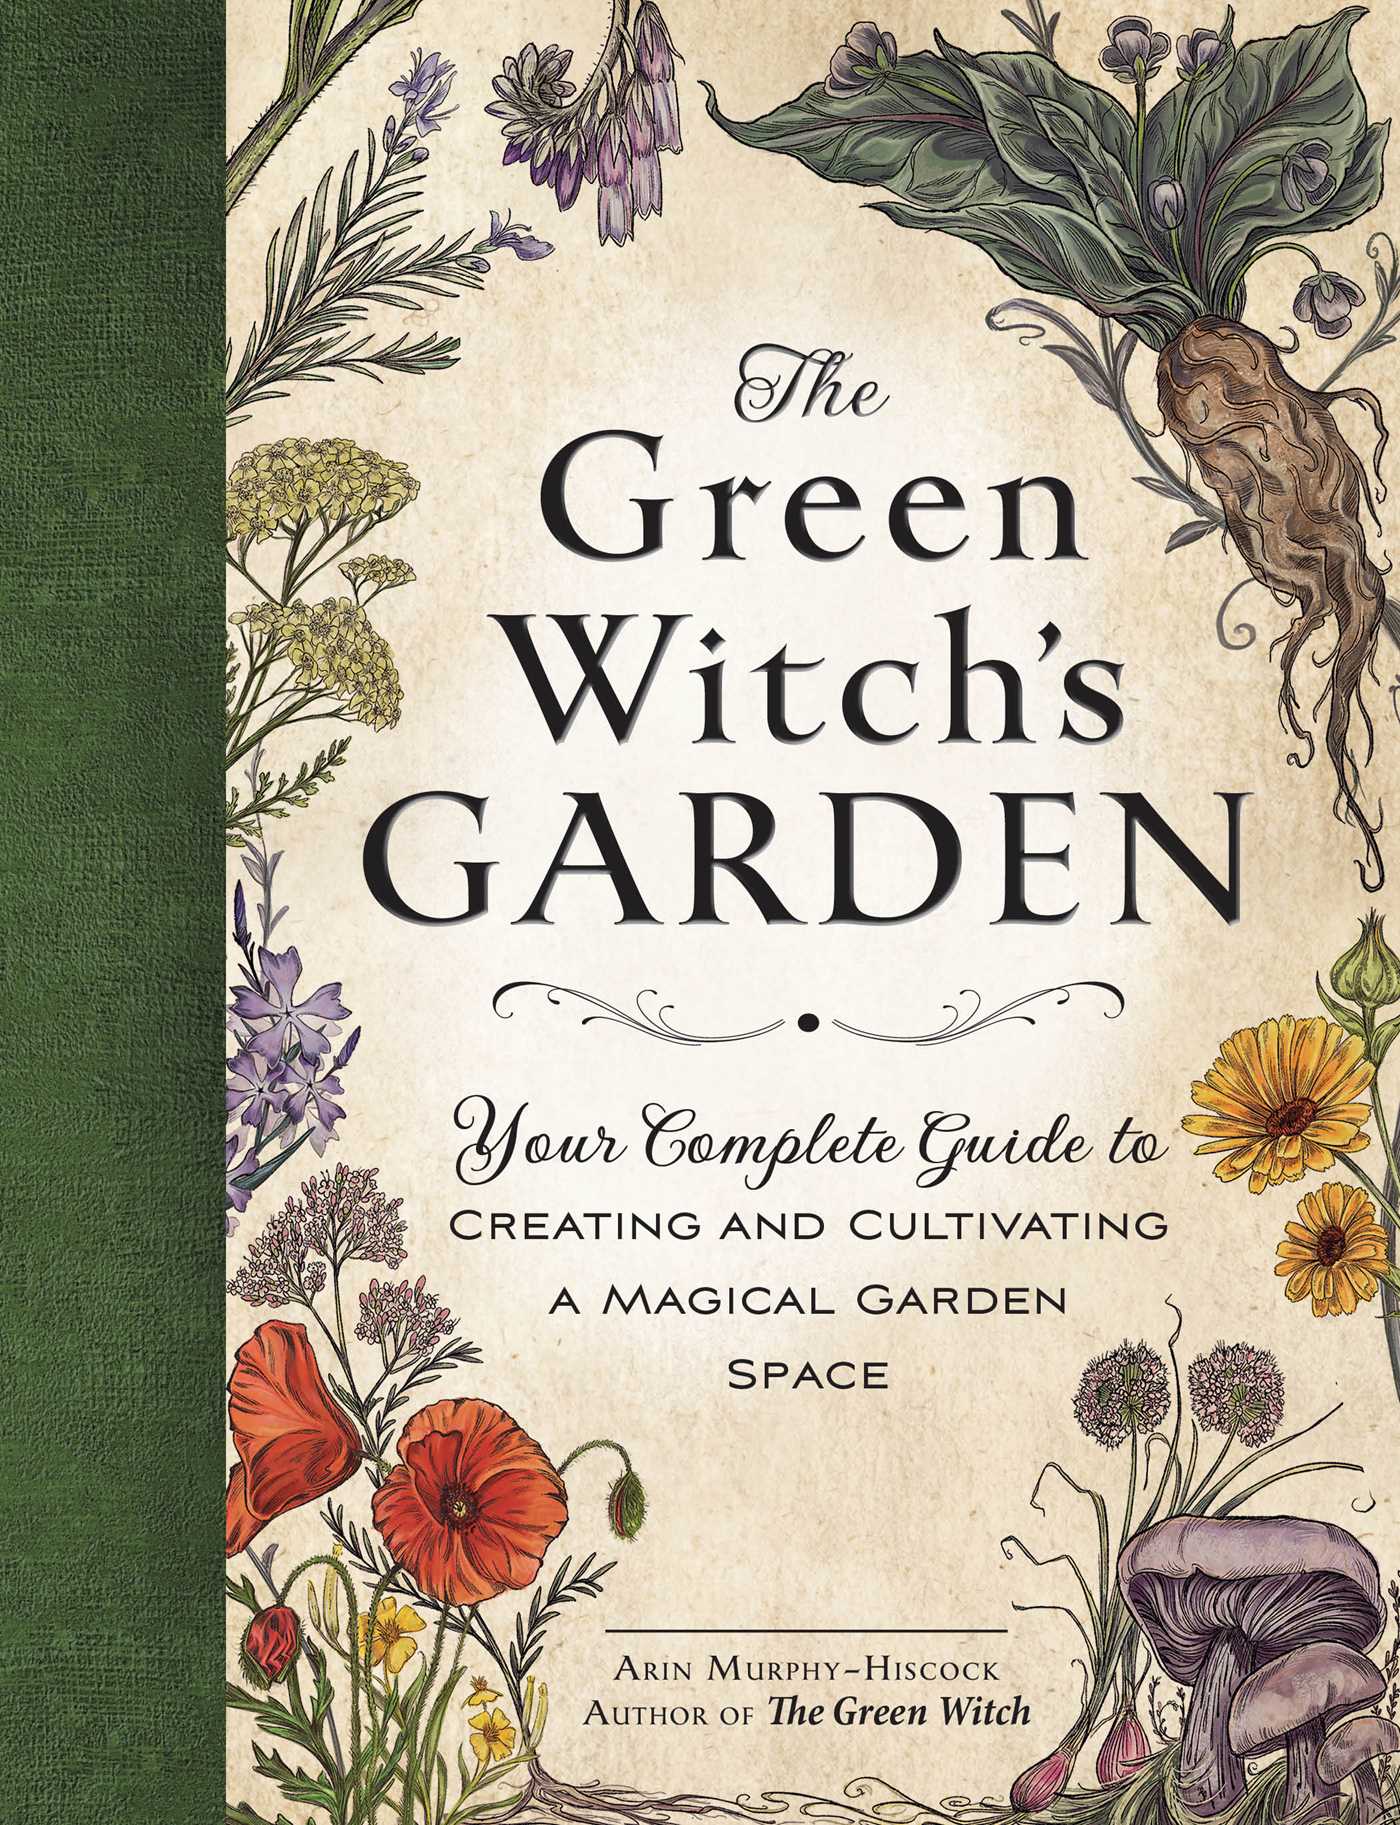 The Green Witch's Garden : Your Complete Guide to Creating and Cultivating a Magical Garden Space | Murphy-Hiscock, Arin